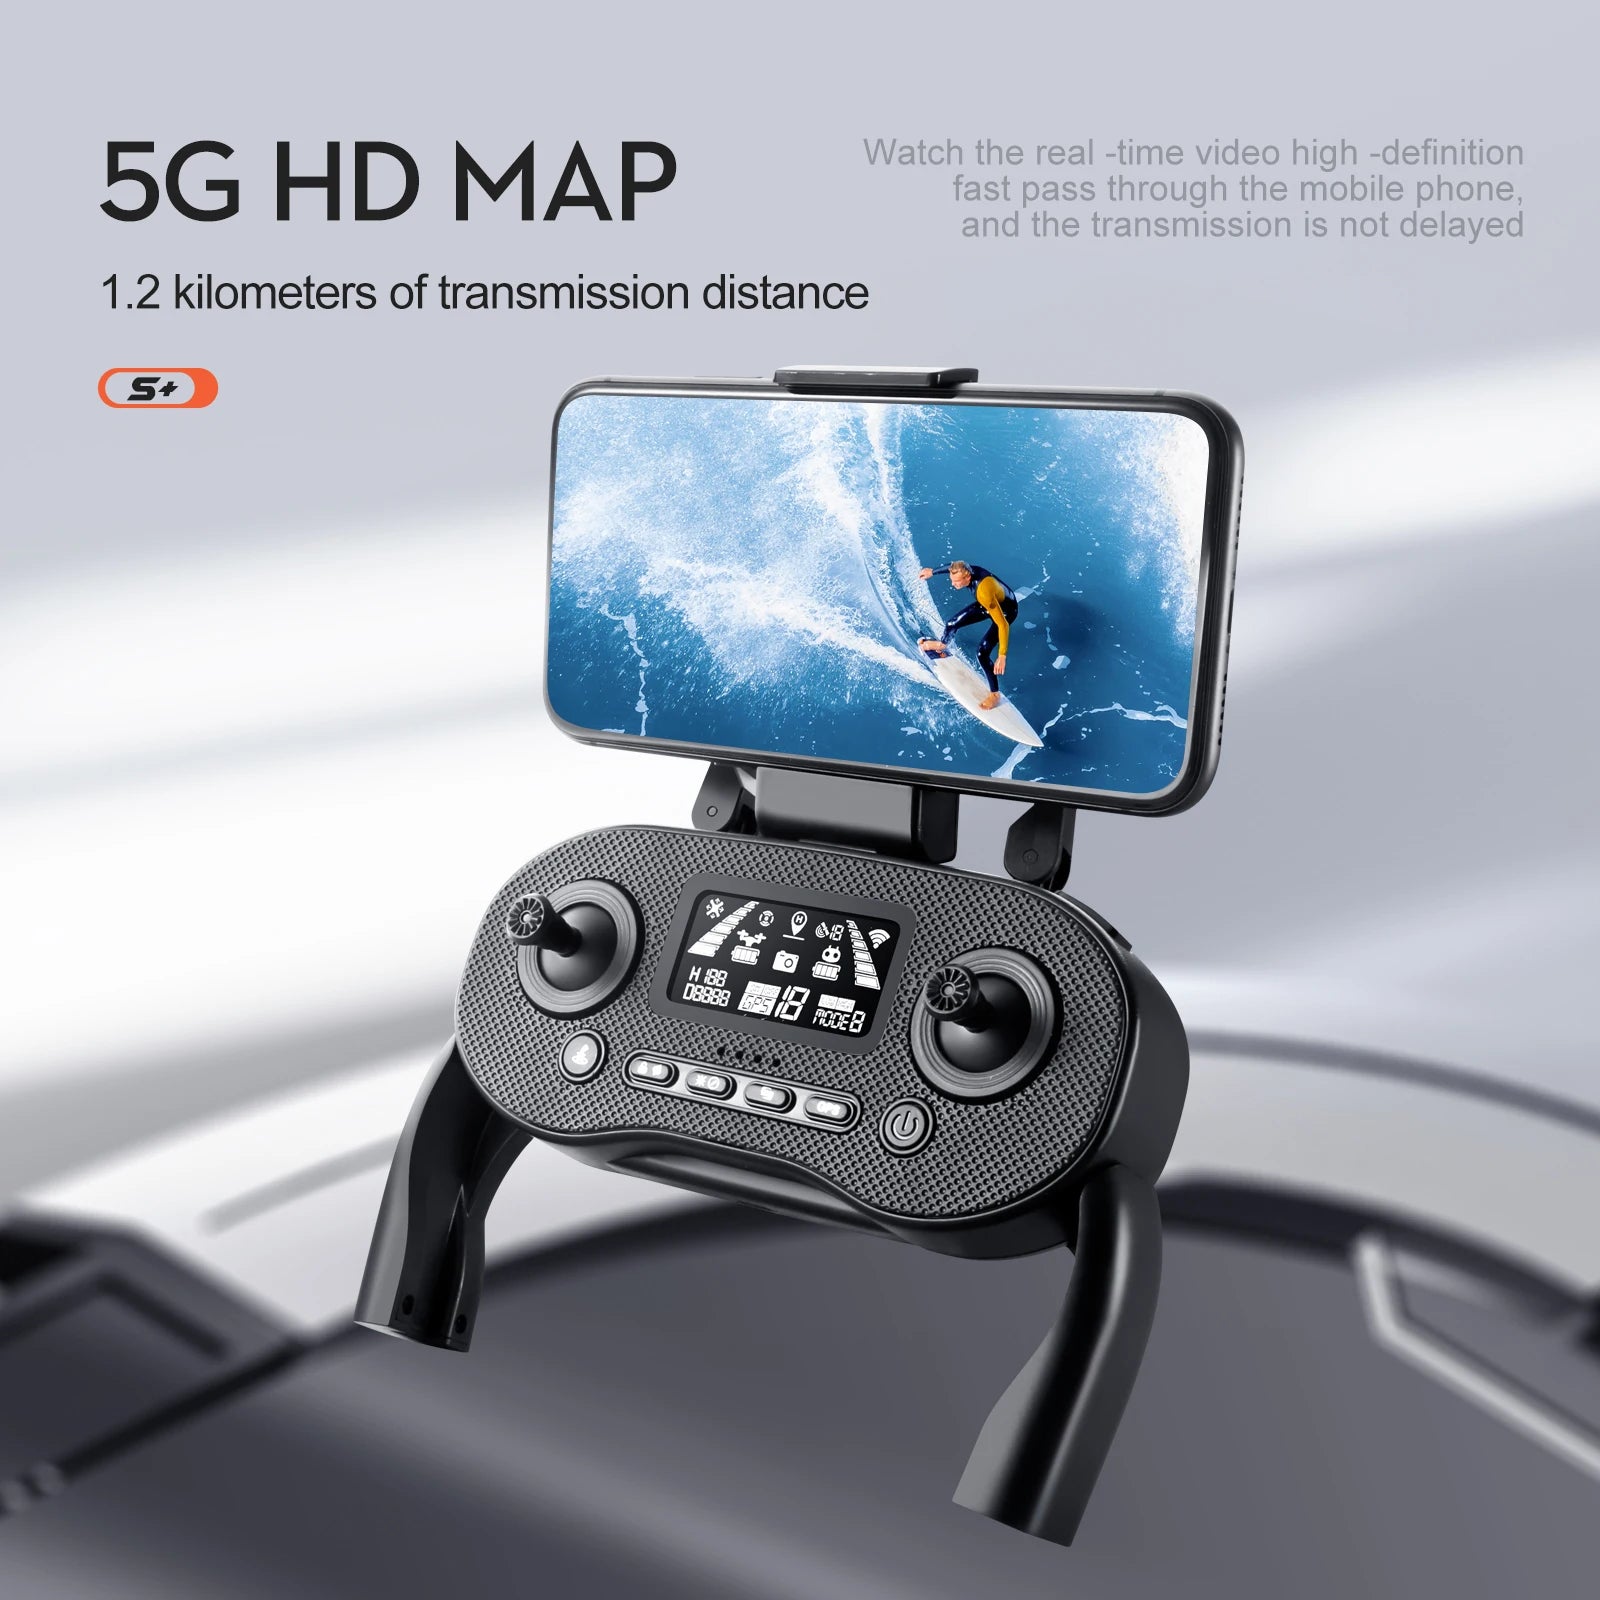 S+ GPS Drone, watch the real -time video high -definition 56 HD MAP fast pass